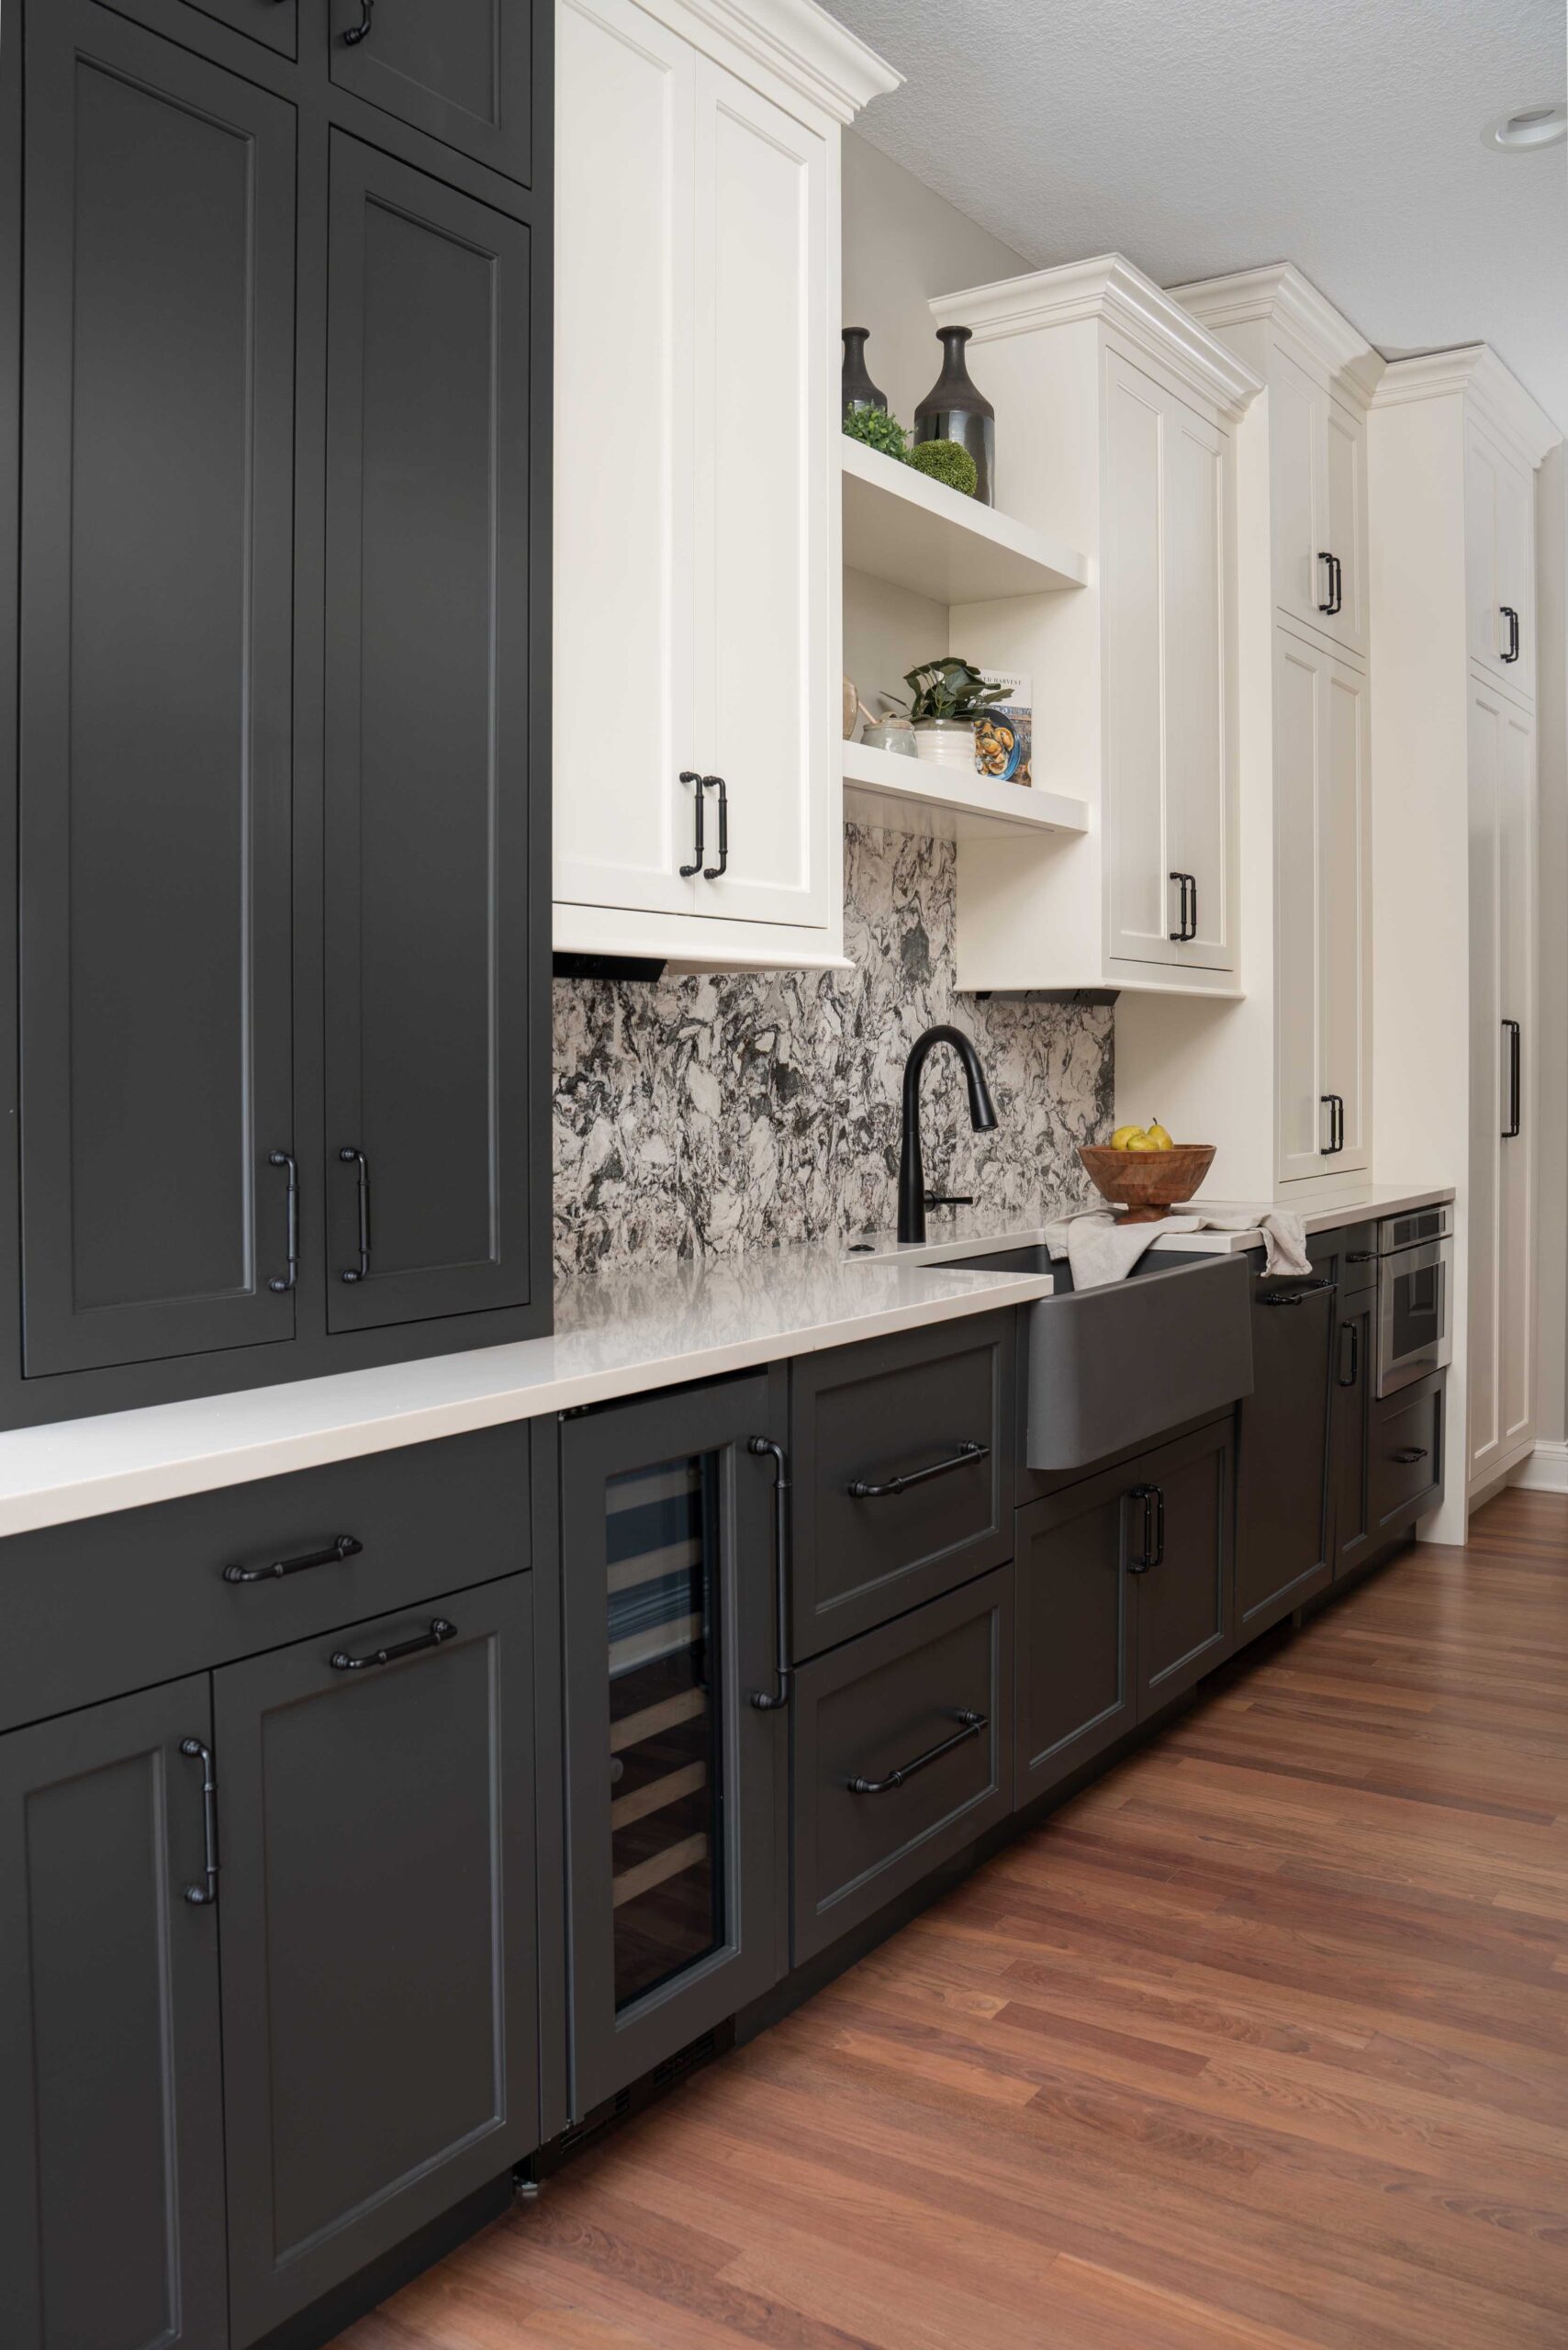 A modern kitchen with black cabinets and white counter tops.